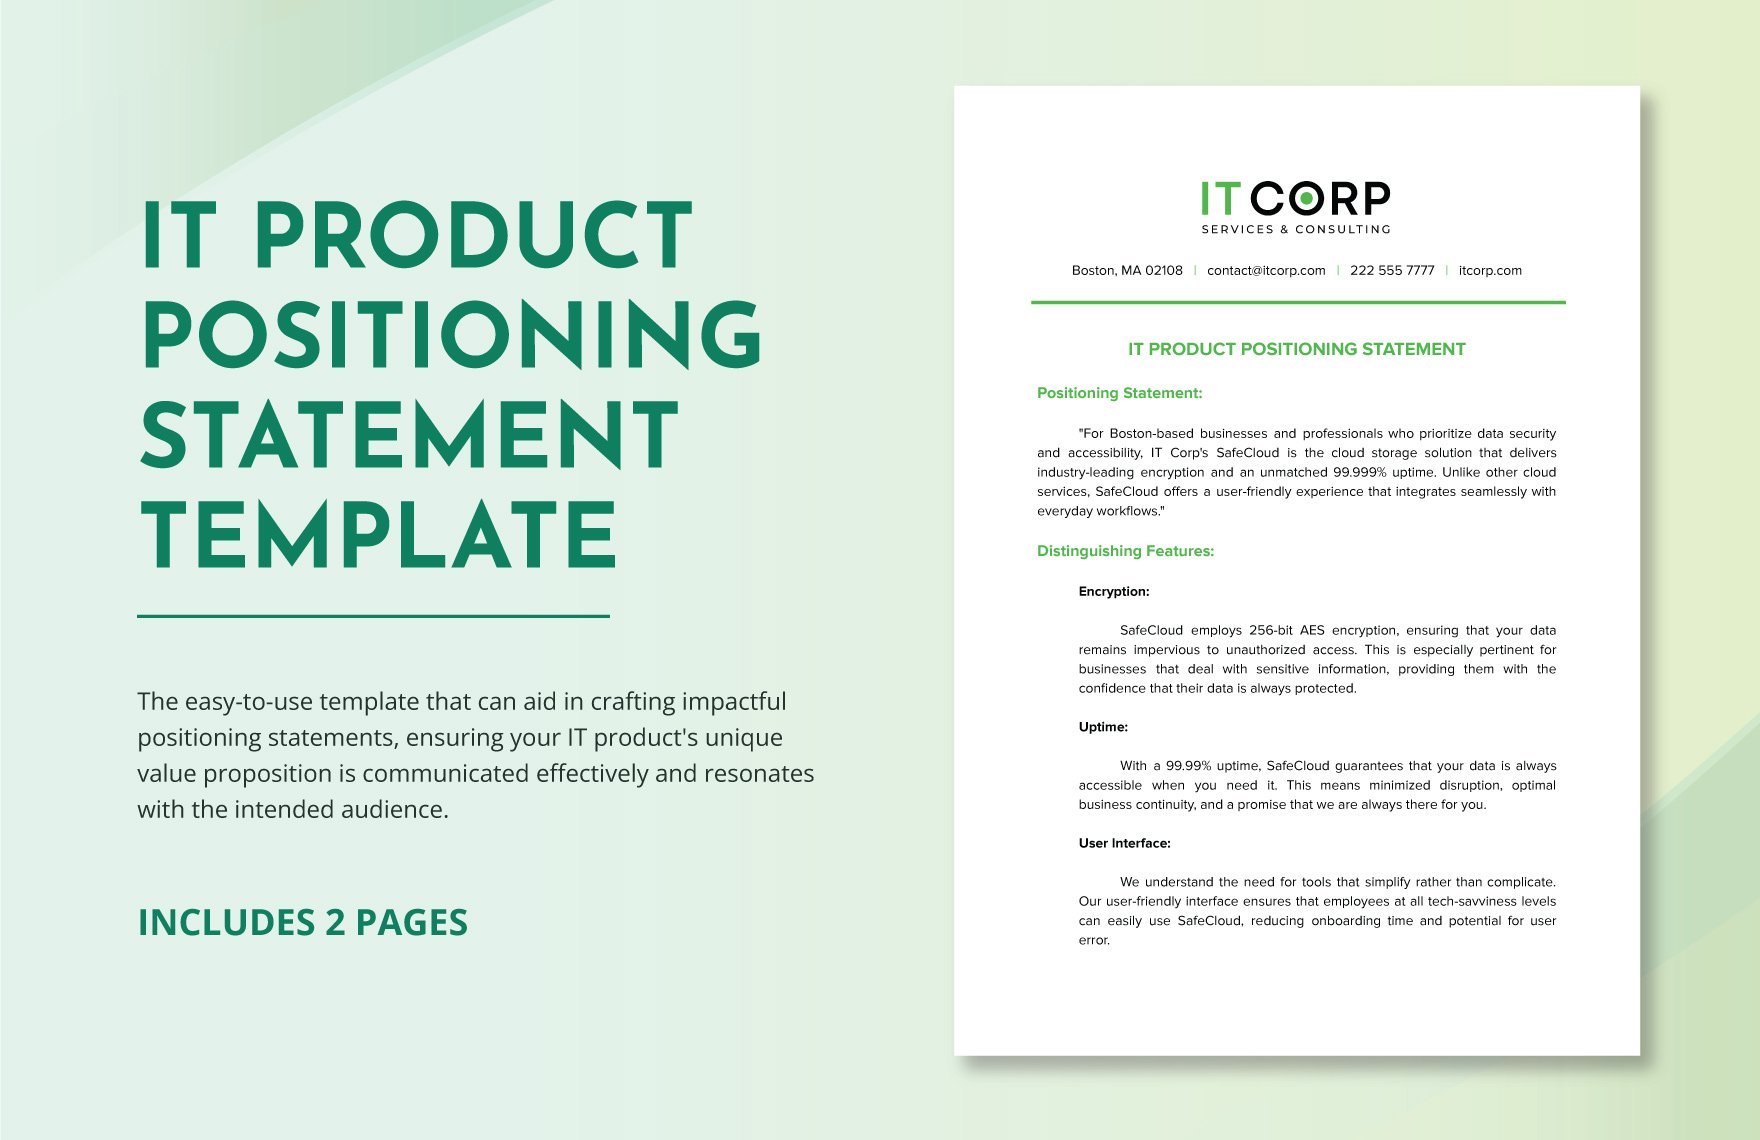 IT Product Positioning Statement Template